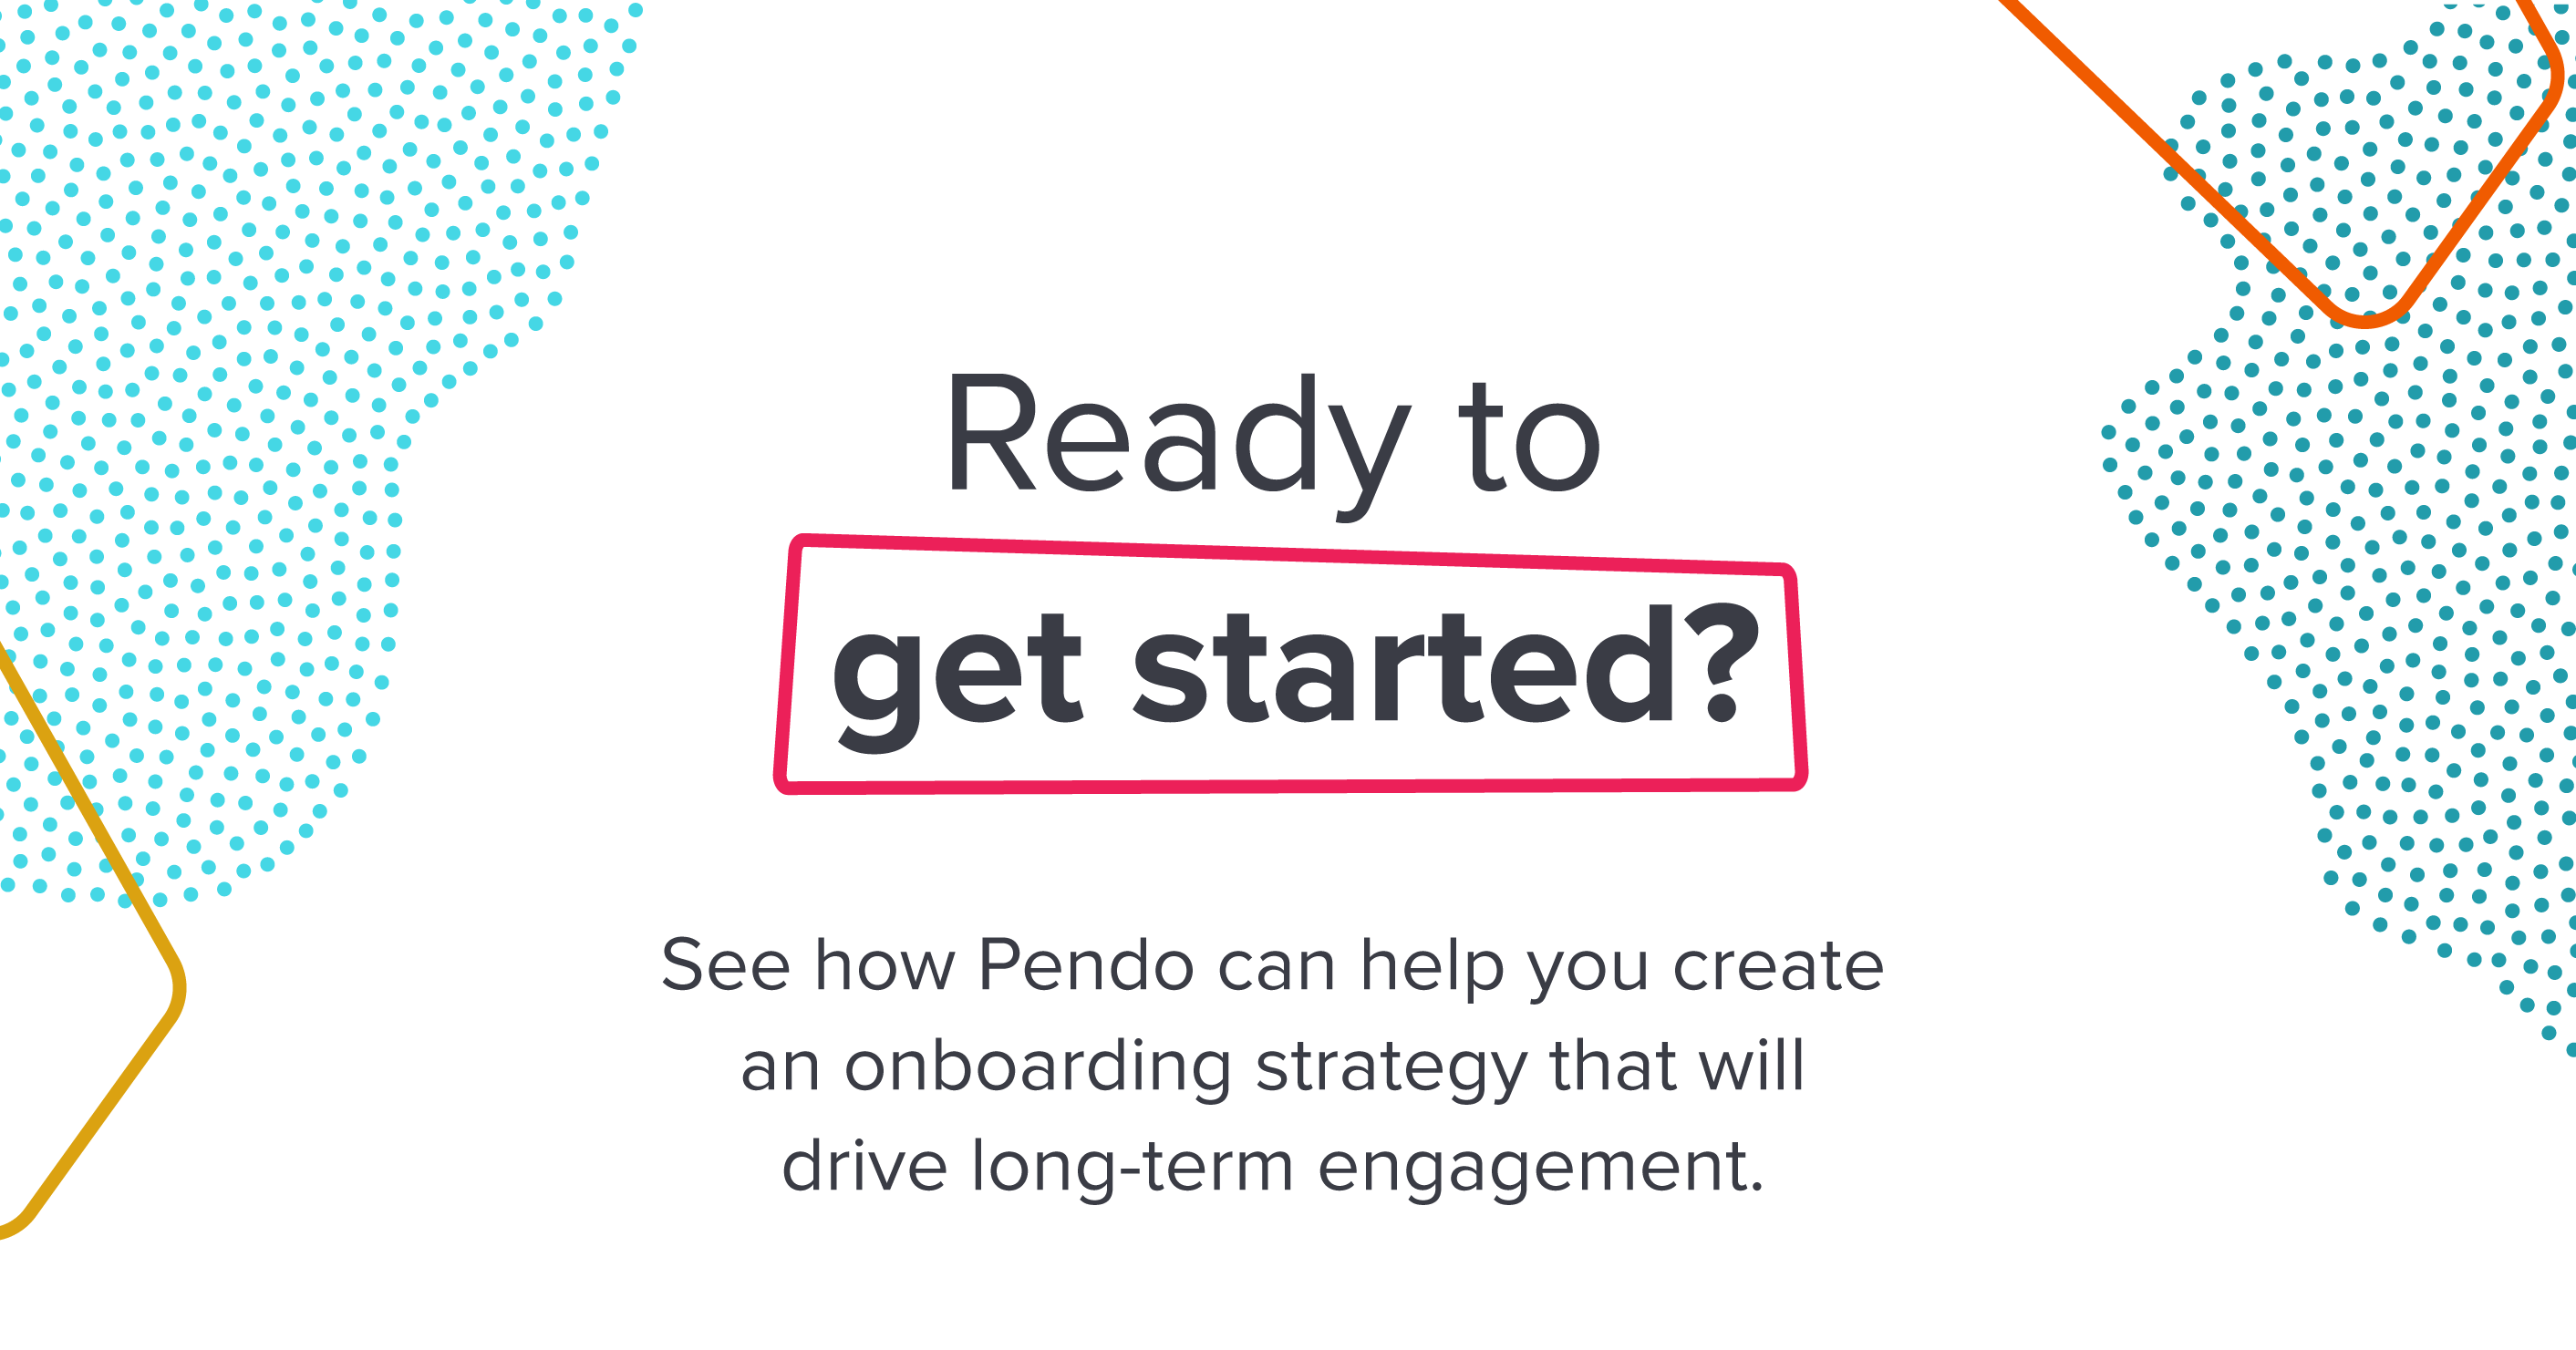 Read to get started with your onboarding strategy?